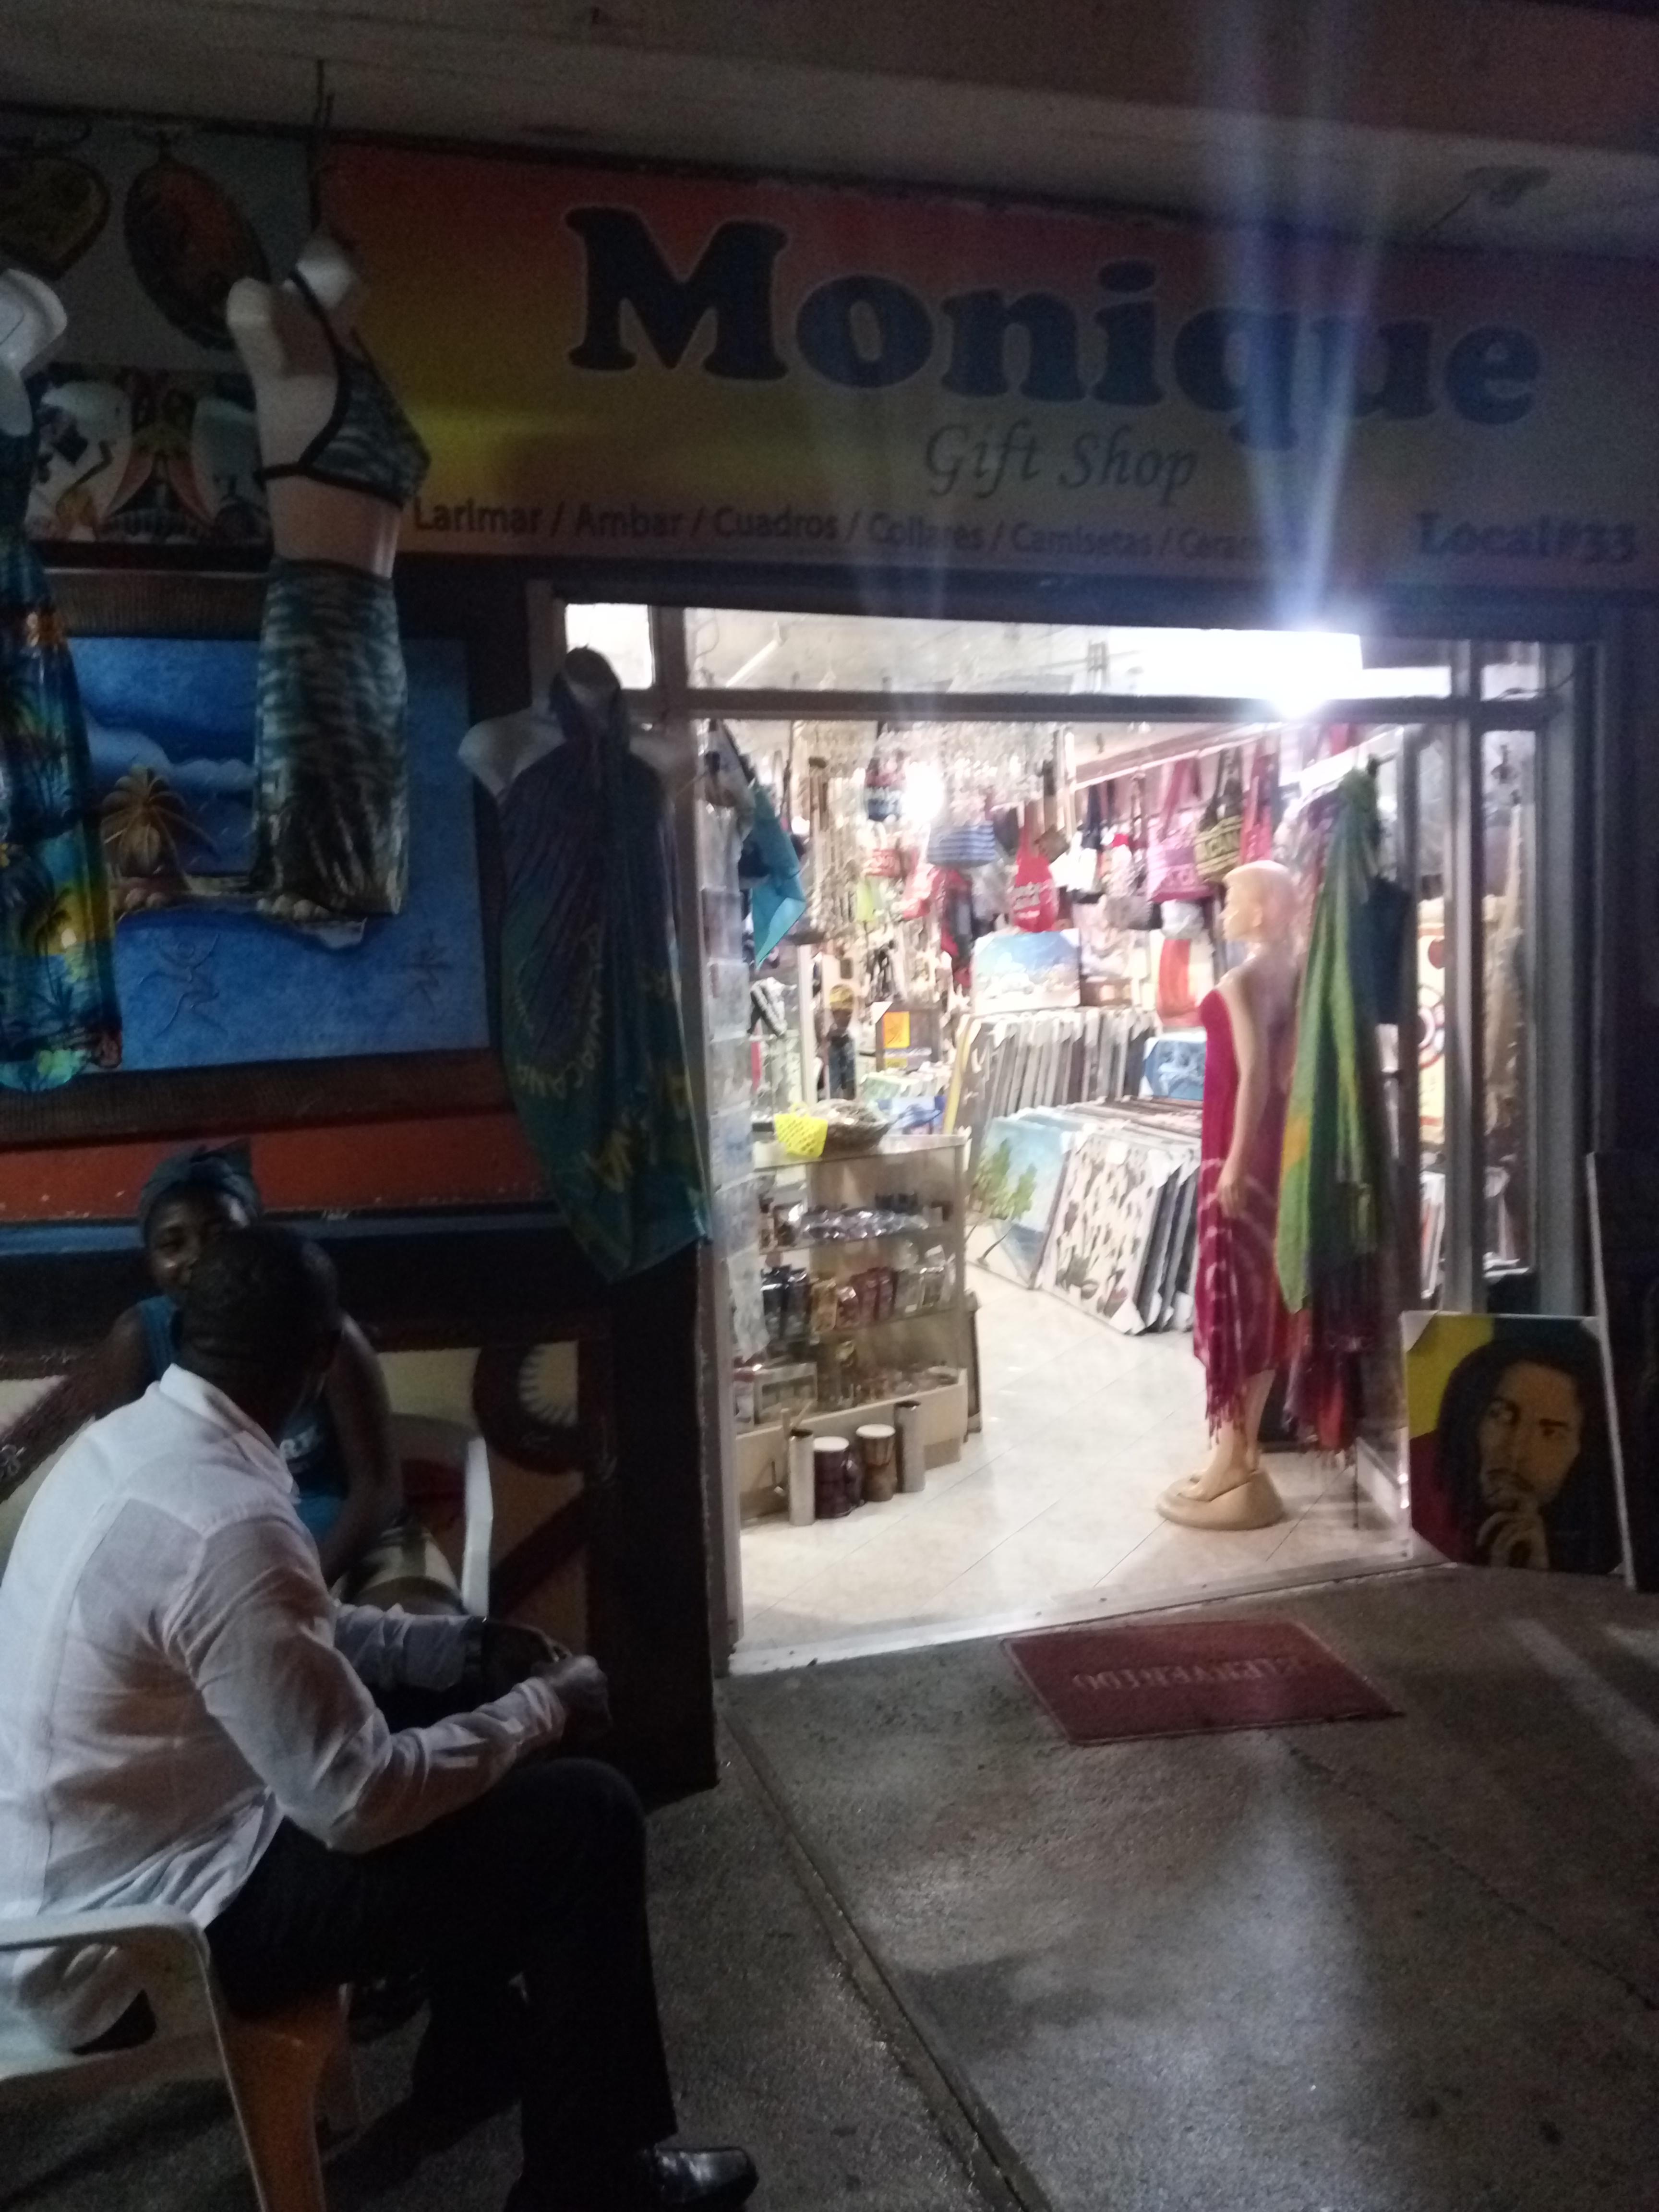 Cover image of this place Monique gift shop